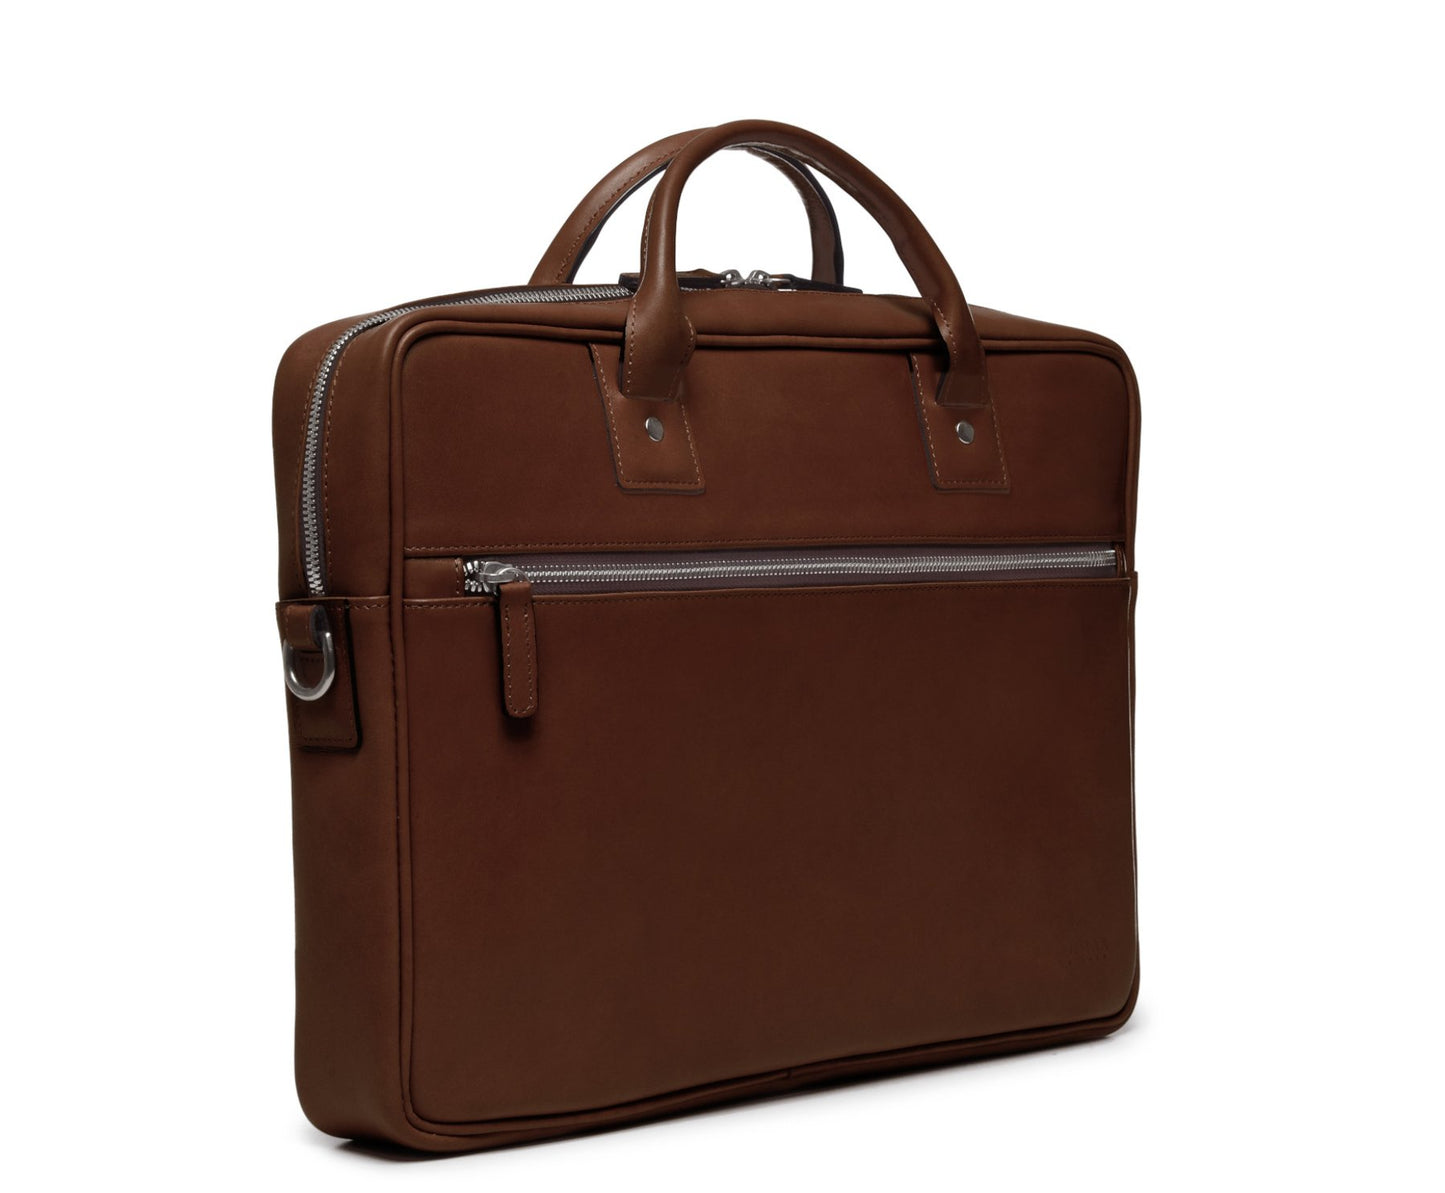 DYLAN Leather 15" Brief Bag | Grain Leather | Made in USA | Korchmar | London Tan Leather with Nickel Fittings